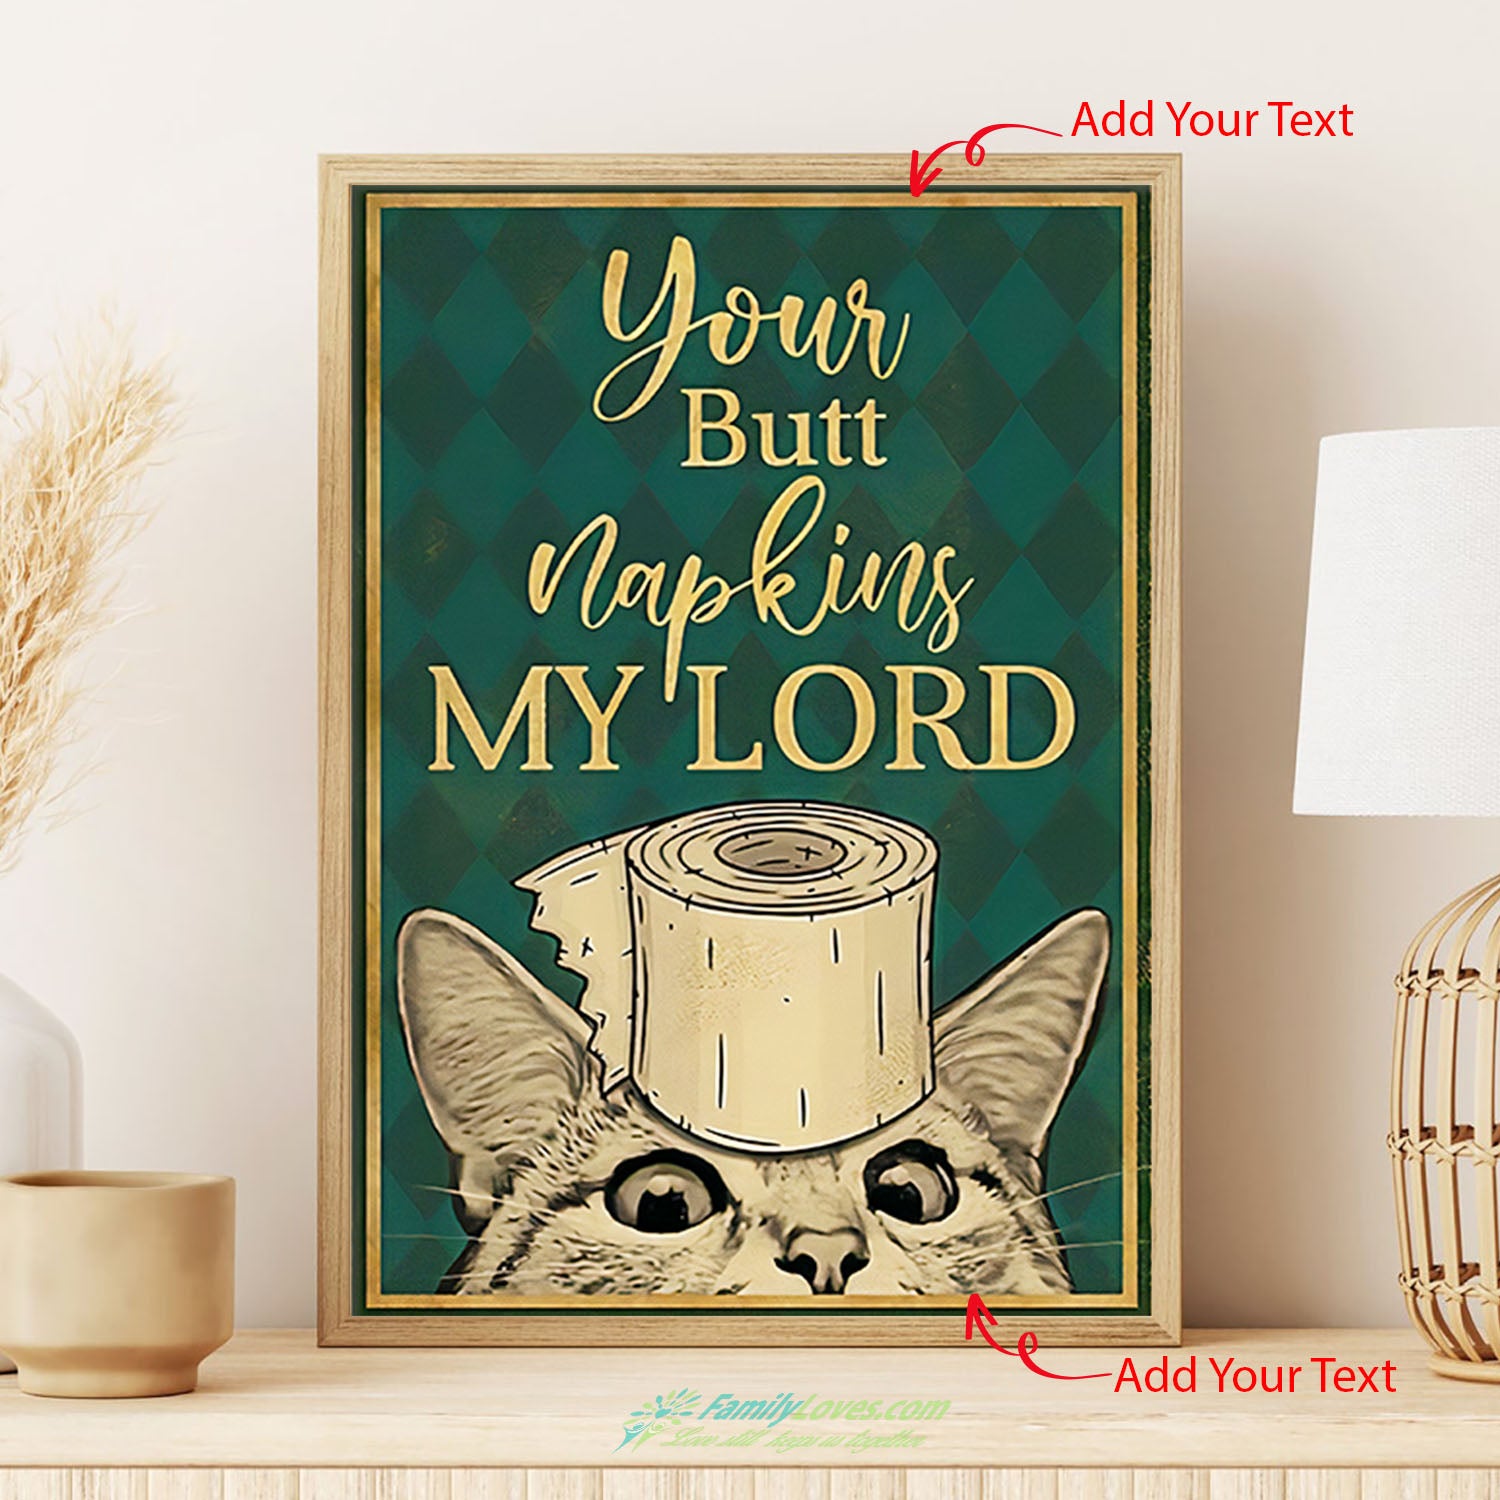 Cat Your Butt Napkins My Lord Painting Canvas Poster Wall All Size 1